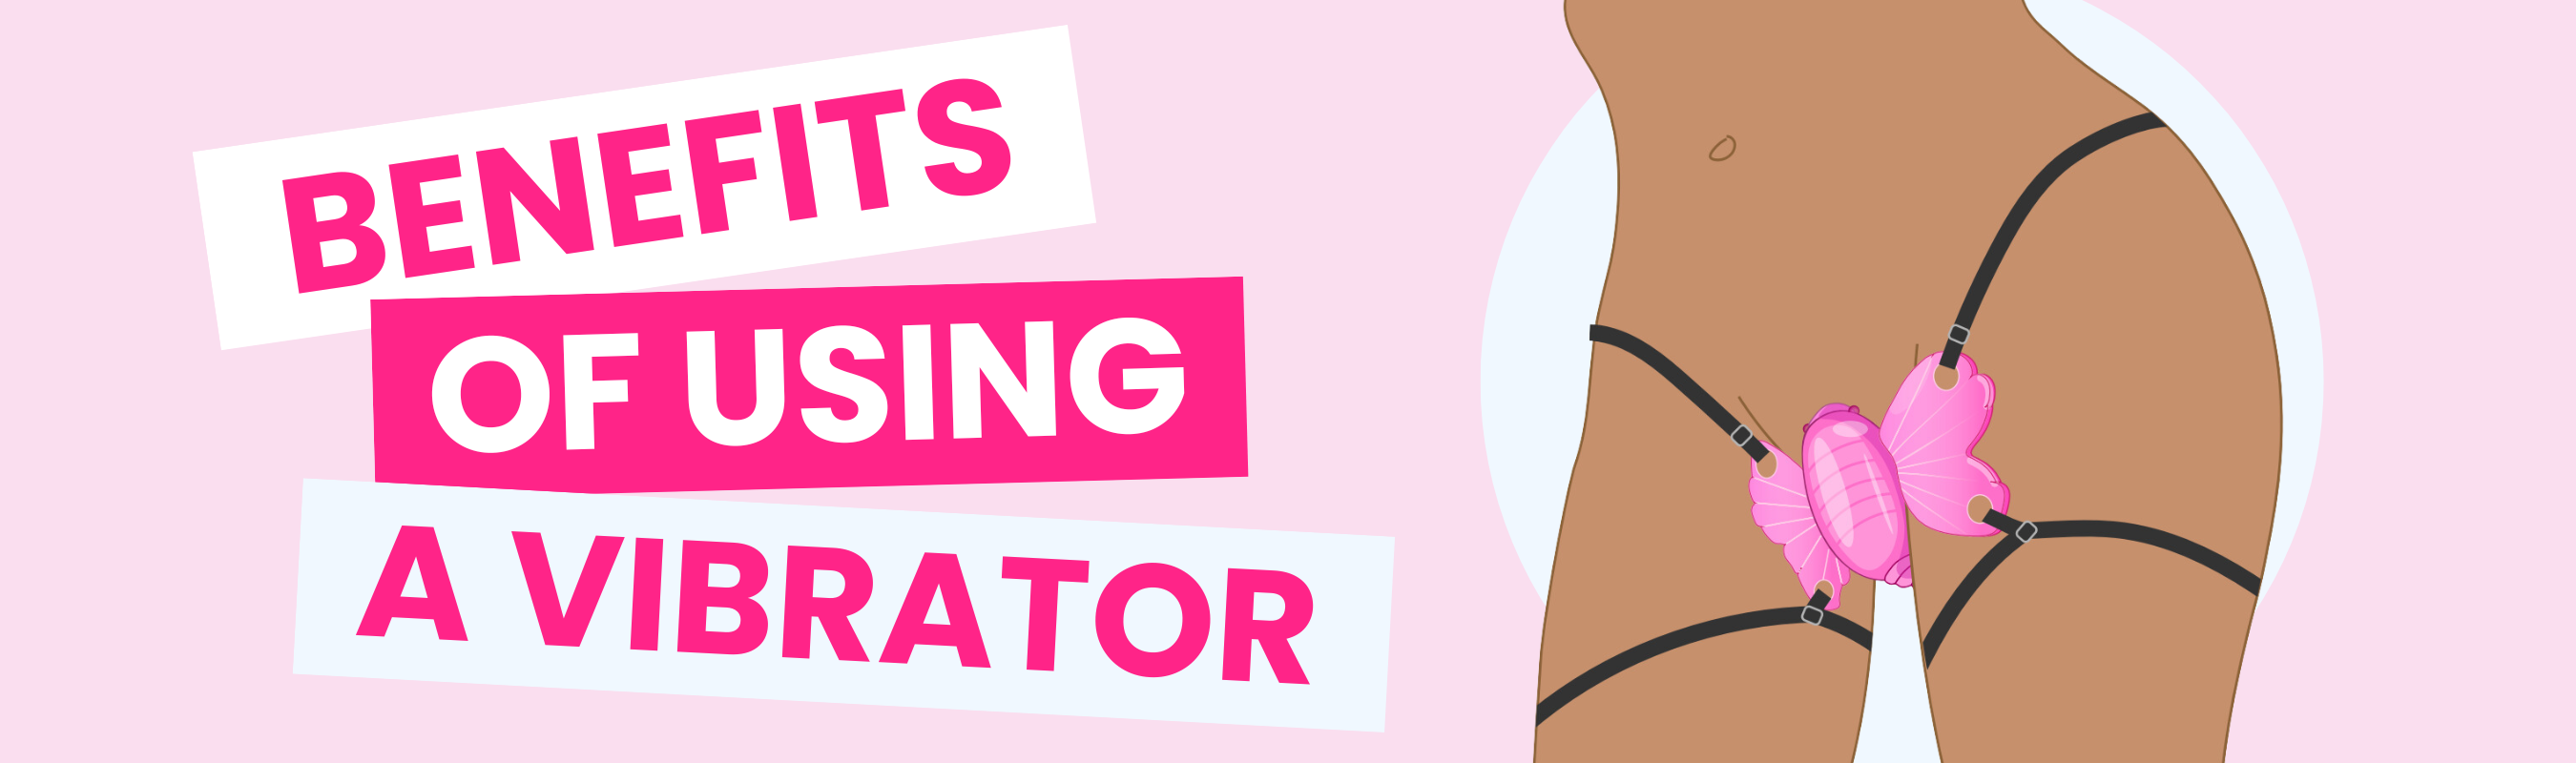 Learn about the benefits of using a vibrator. Graphic includes illustration of person wearing a hands-free butterfly vibe. Image reads: "Benefits of using a vibrator"